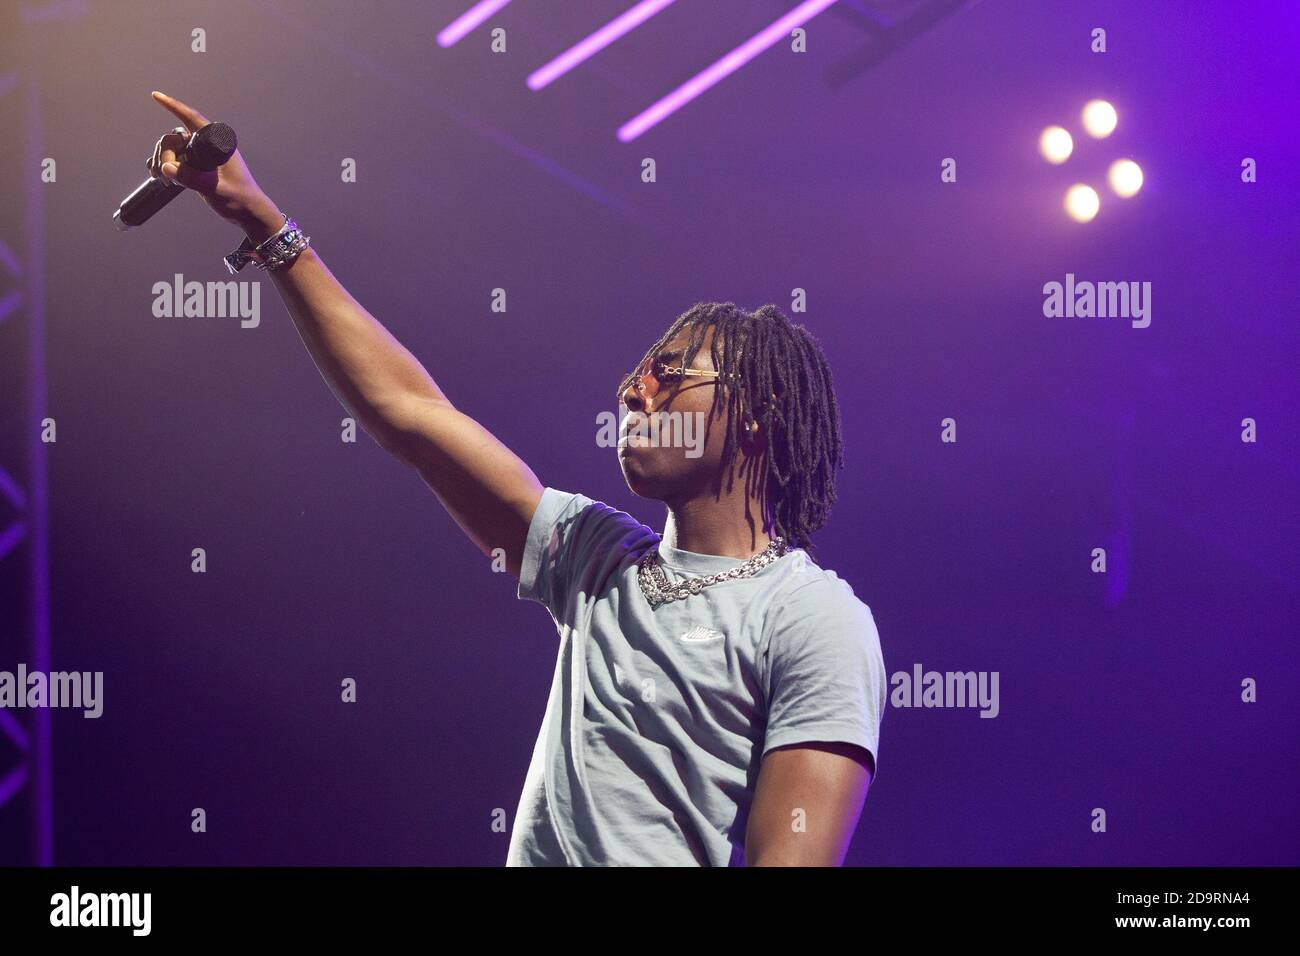 Paris, France 22th june 2020, Koba LaD, french singer, at the Solidays Festival, François Loock/Alamy Stock Photo